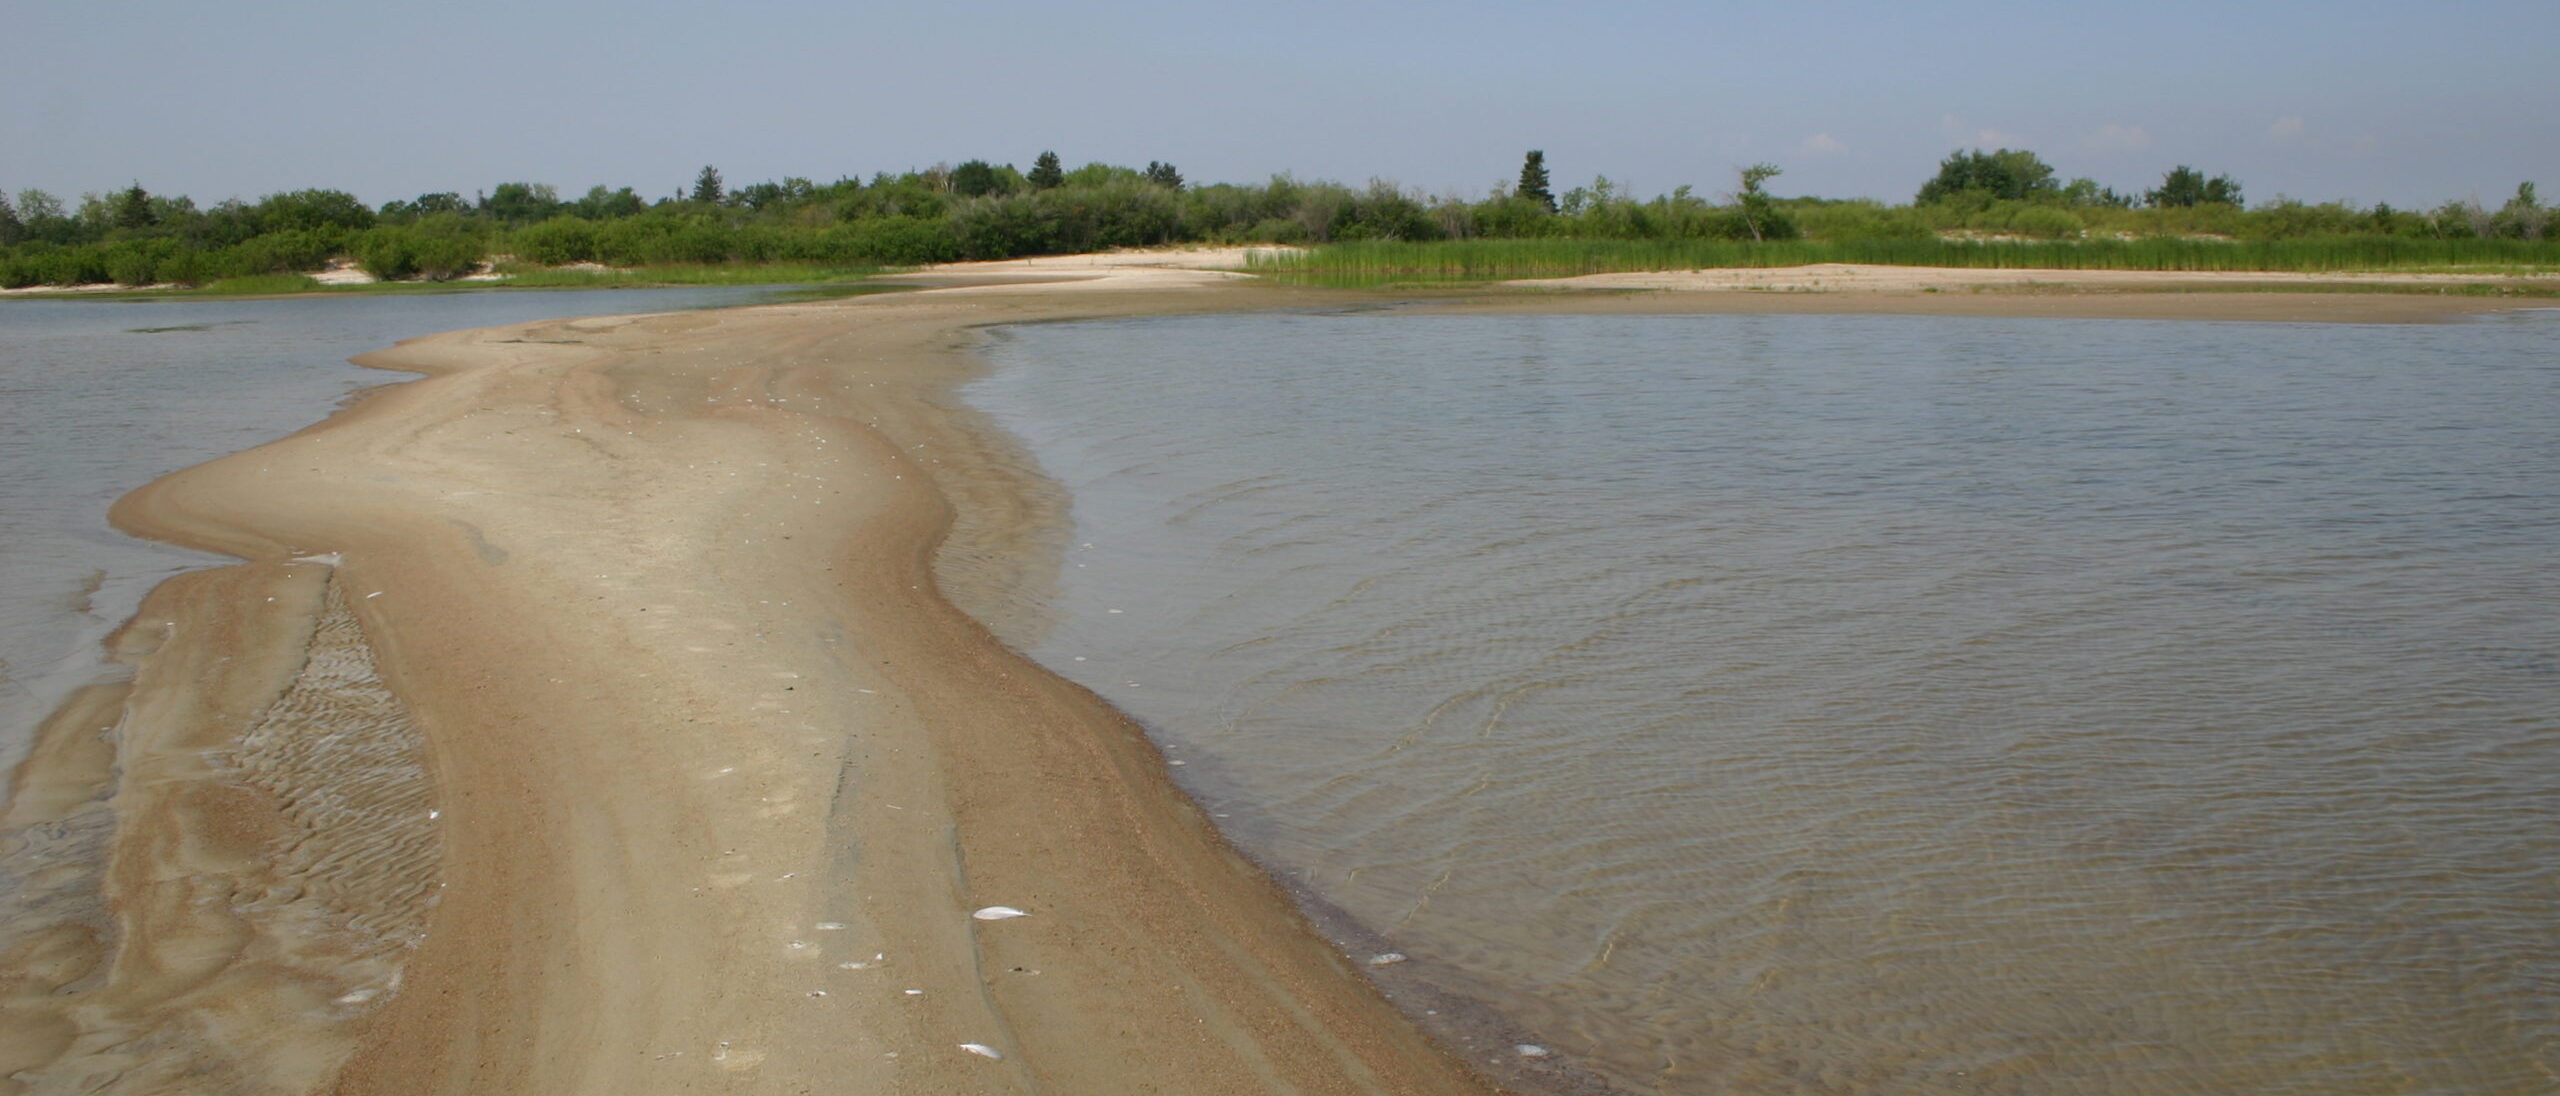 Looking down a emerging sandbar toward a section of wooded land. Water flows either side of the sand bar.